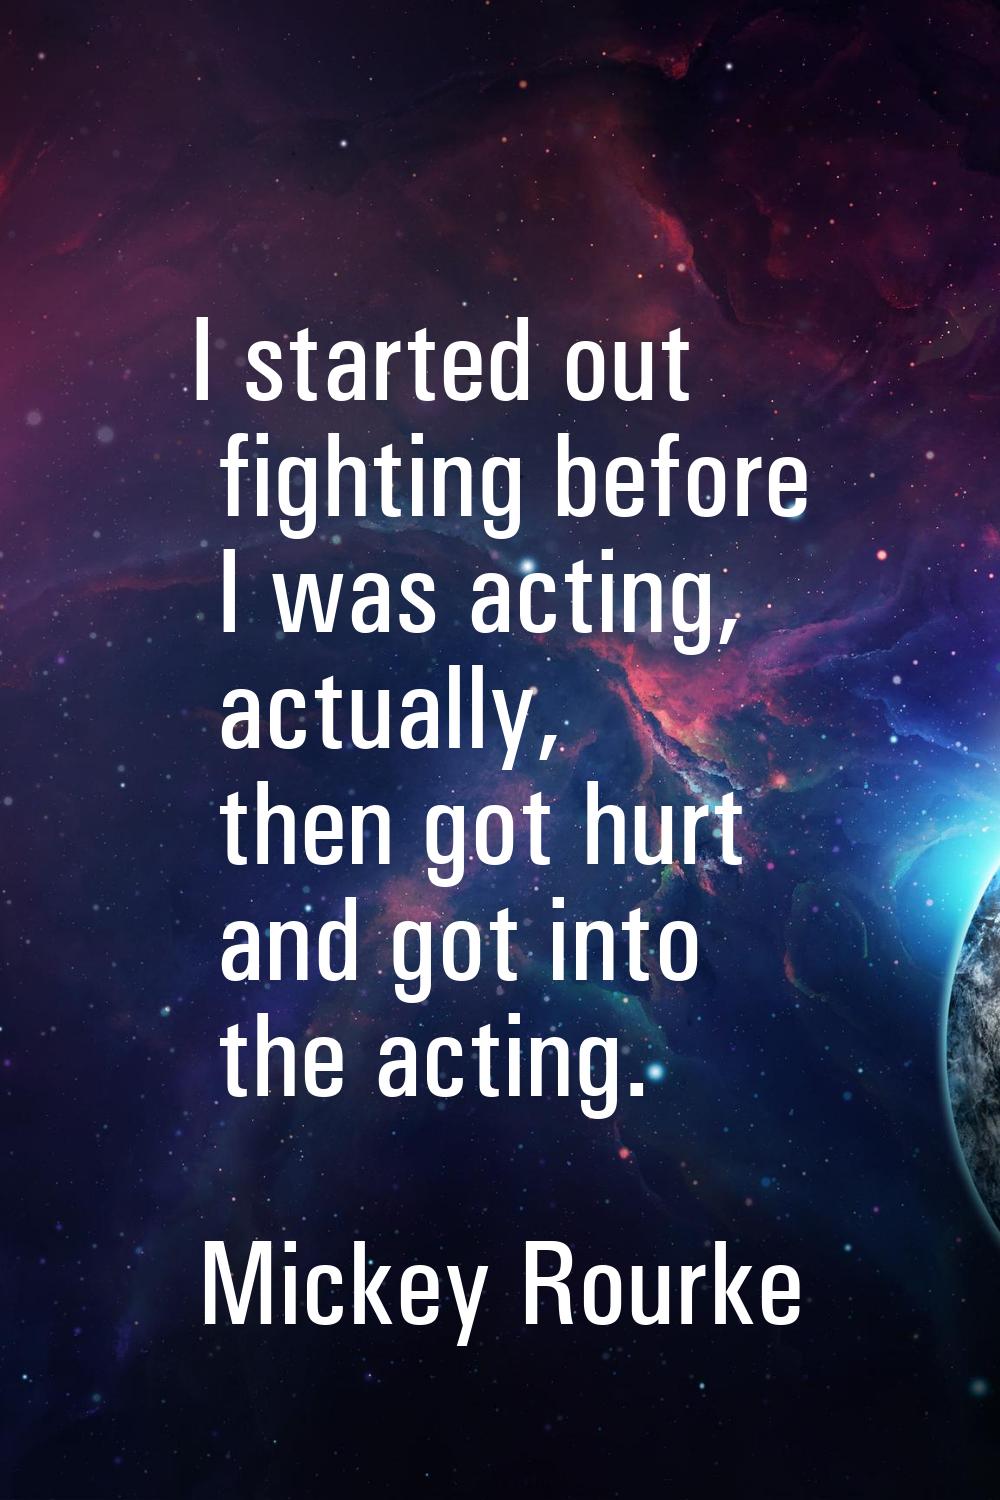 I started out fighting before I was acting, actually, then got hurt and got into the acting.